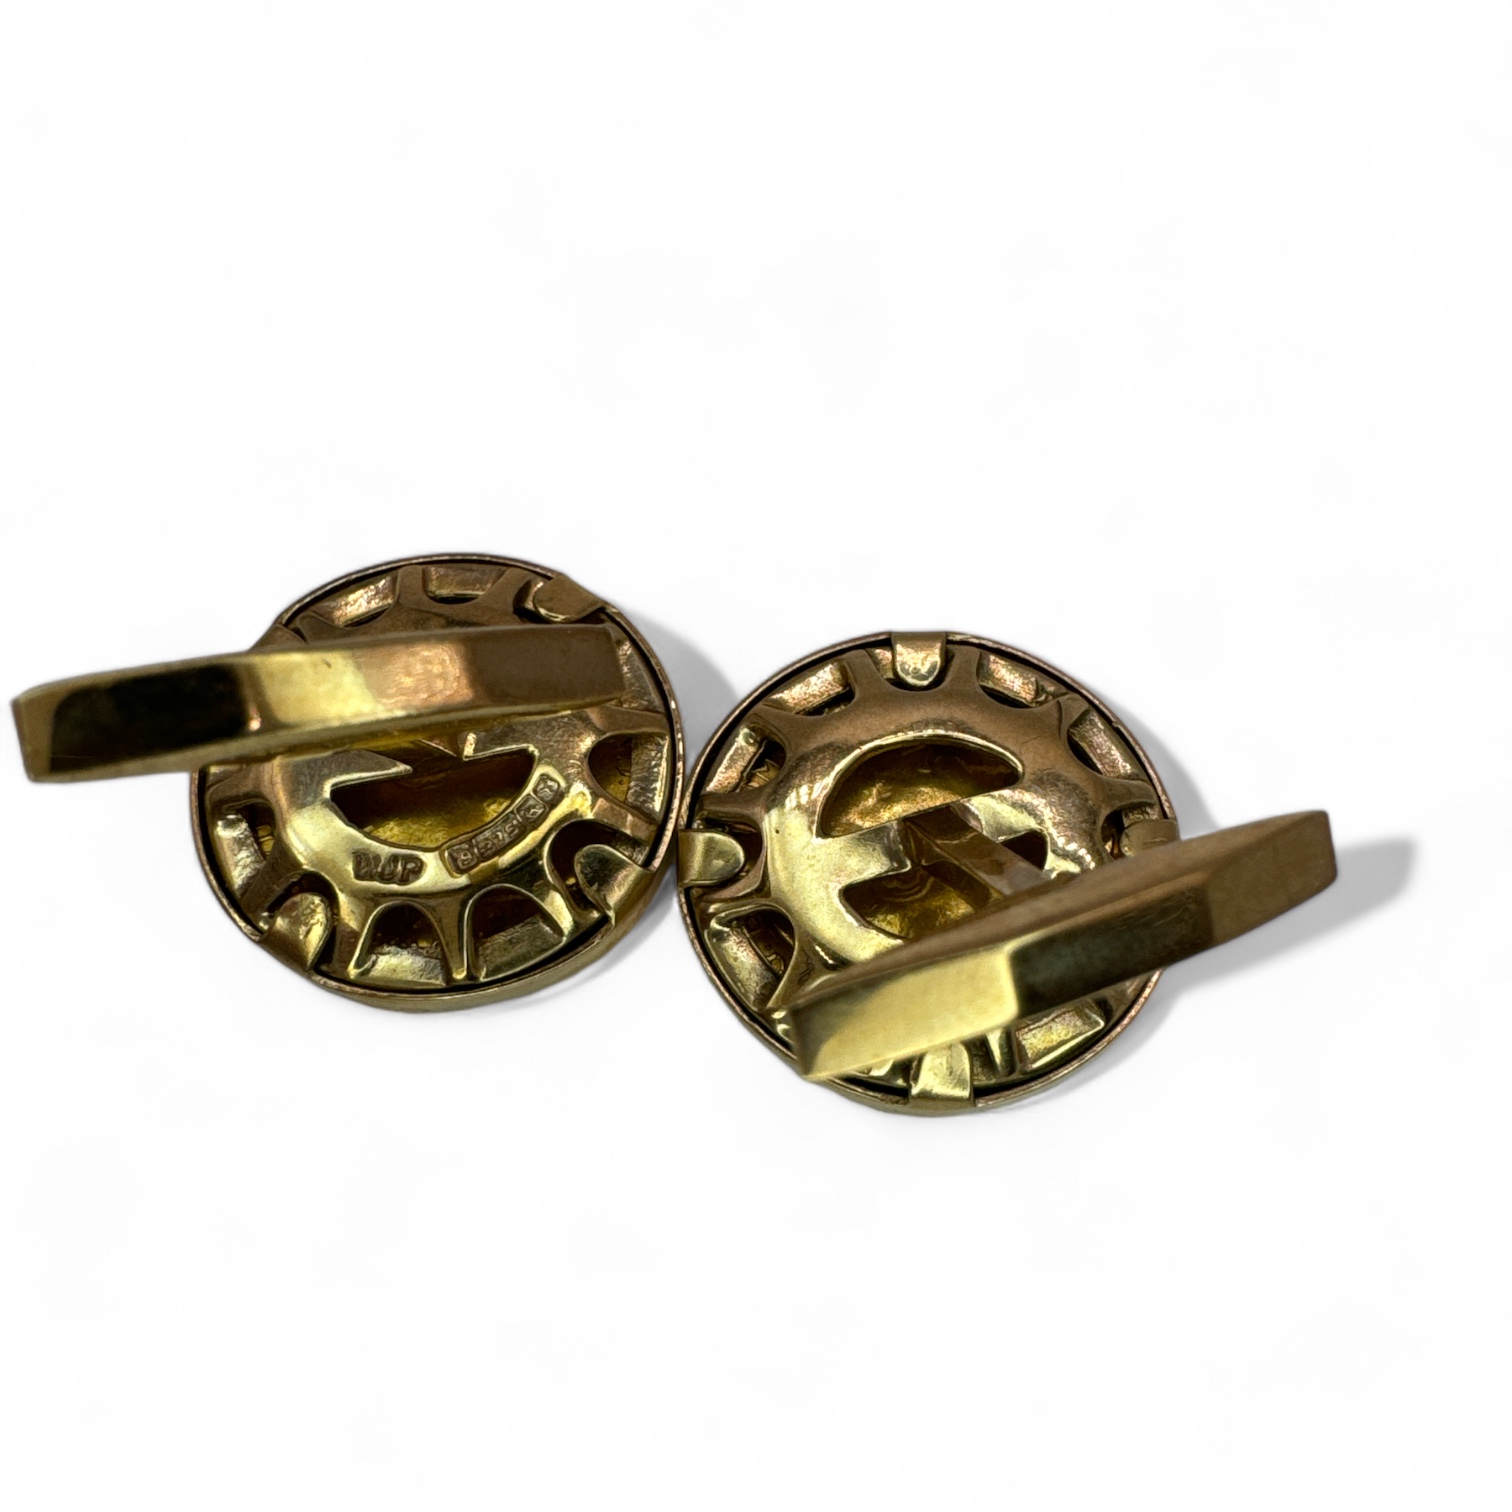 A pair of 9ct gold cufflinks, each set with an Edward VII gold half sovereign. dated 1907 and - Image 2 of 2